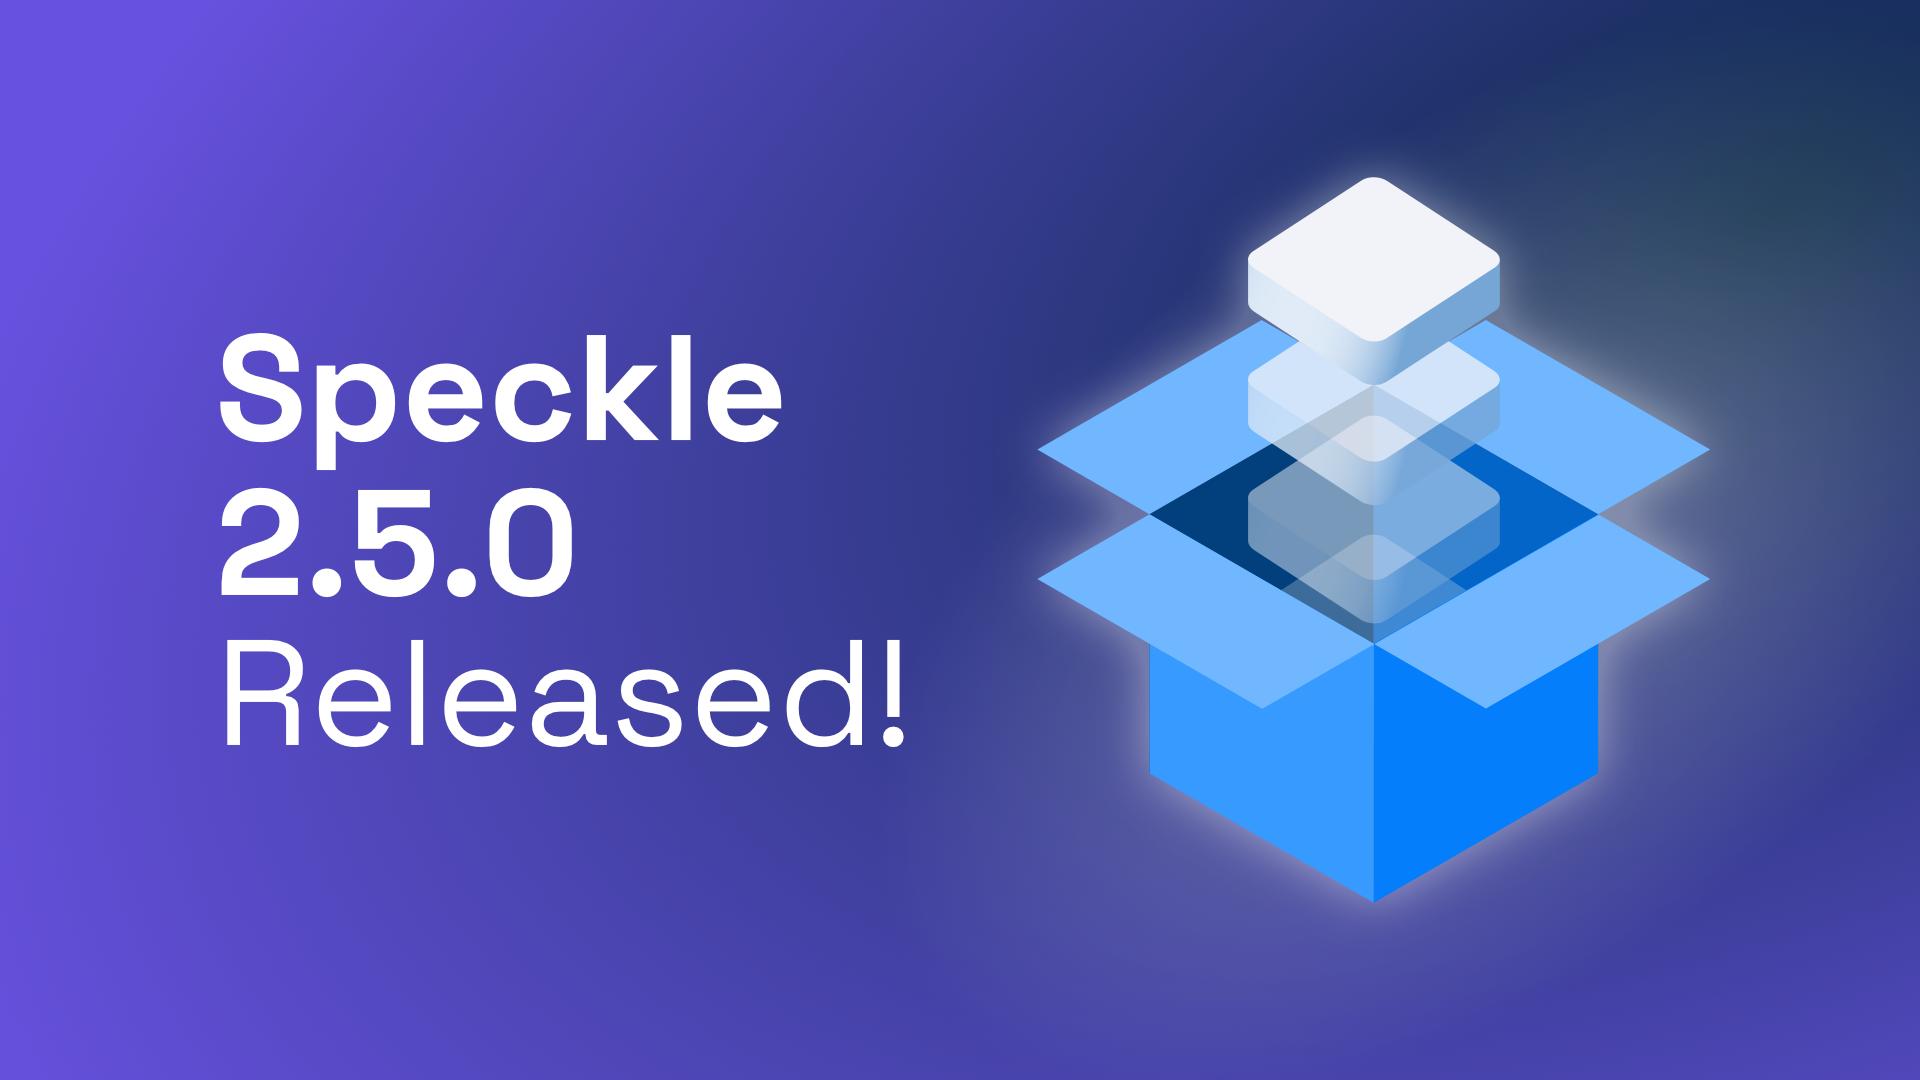 Speckle 2.5.0 Released!